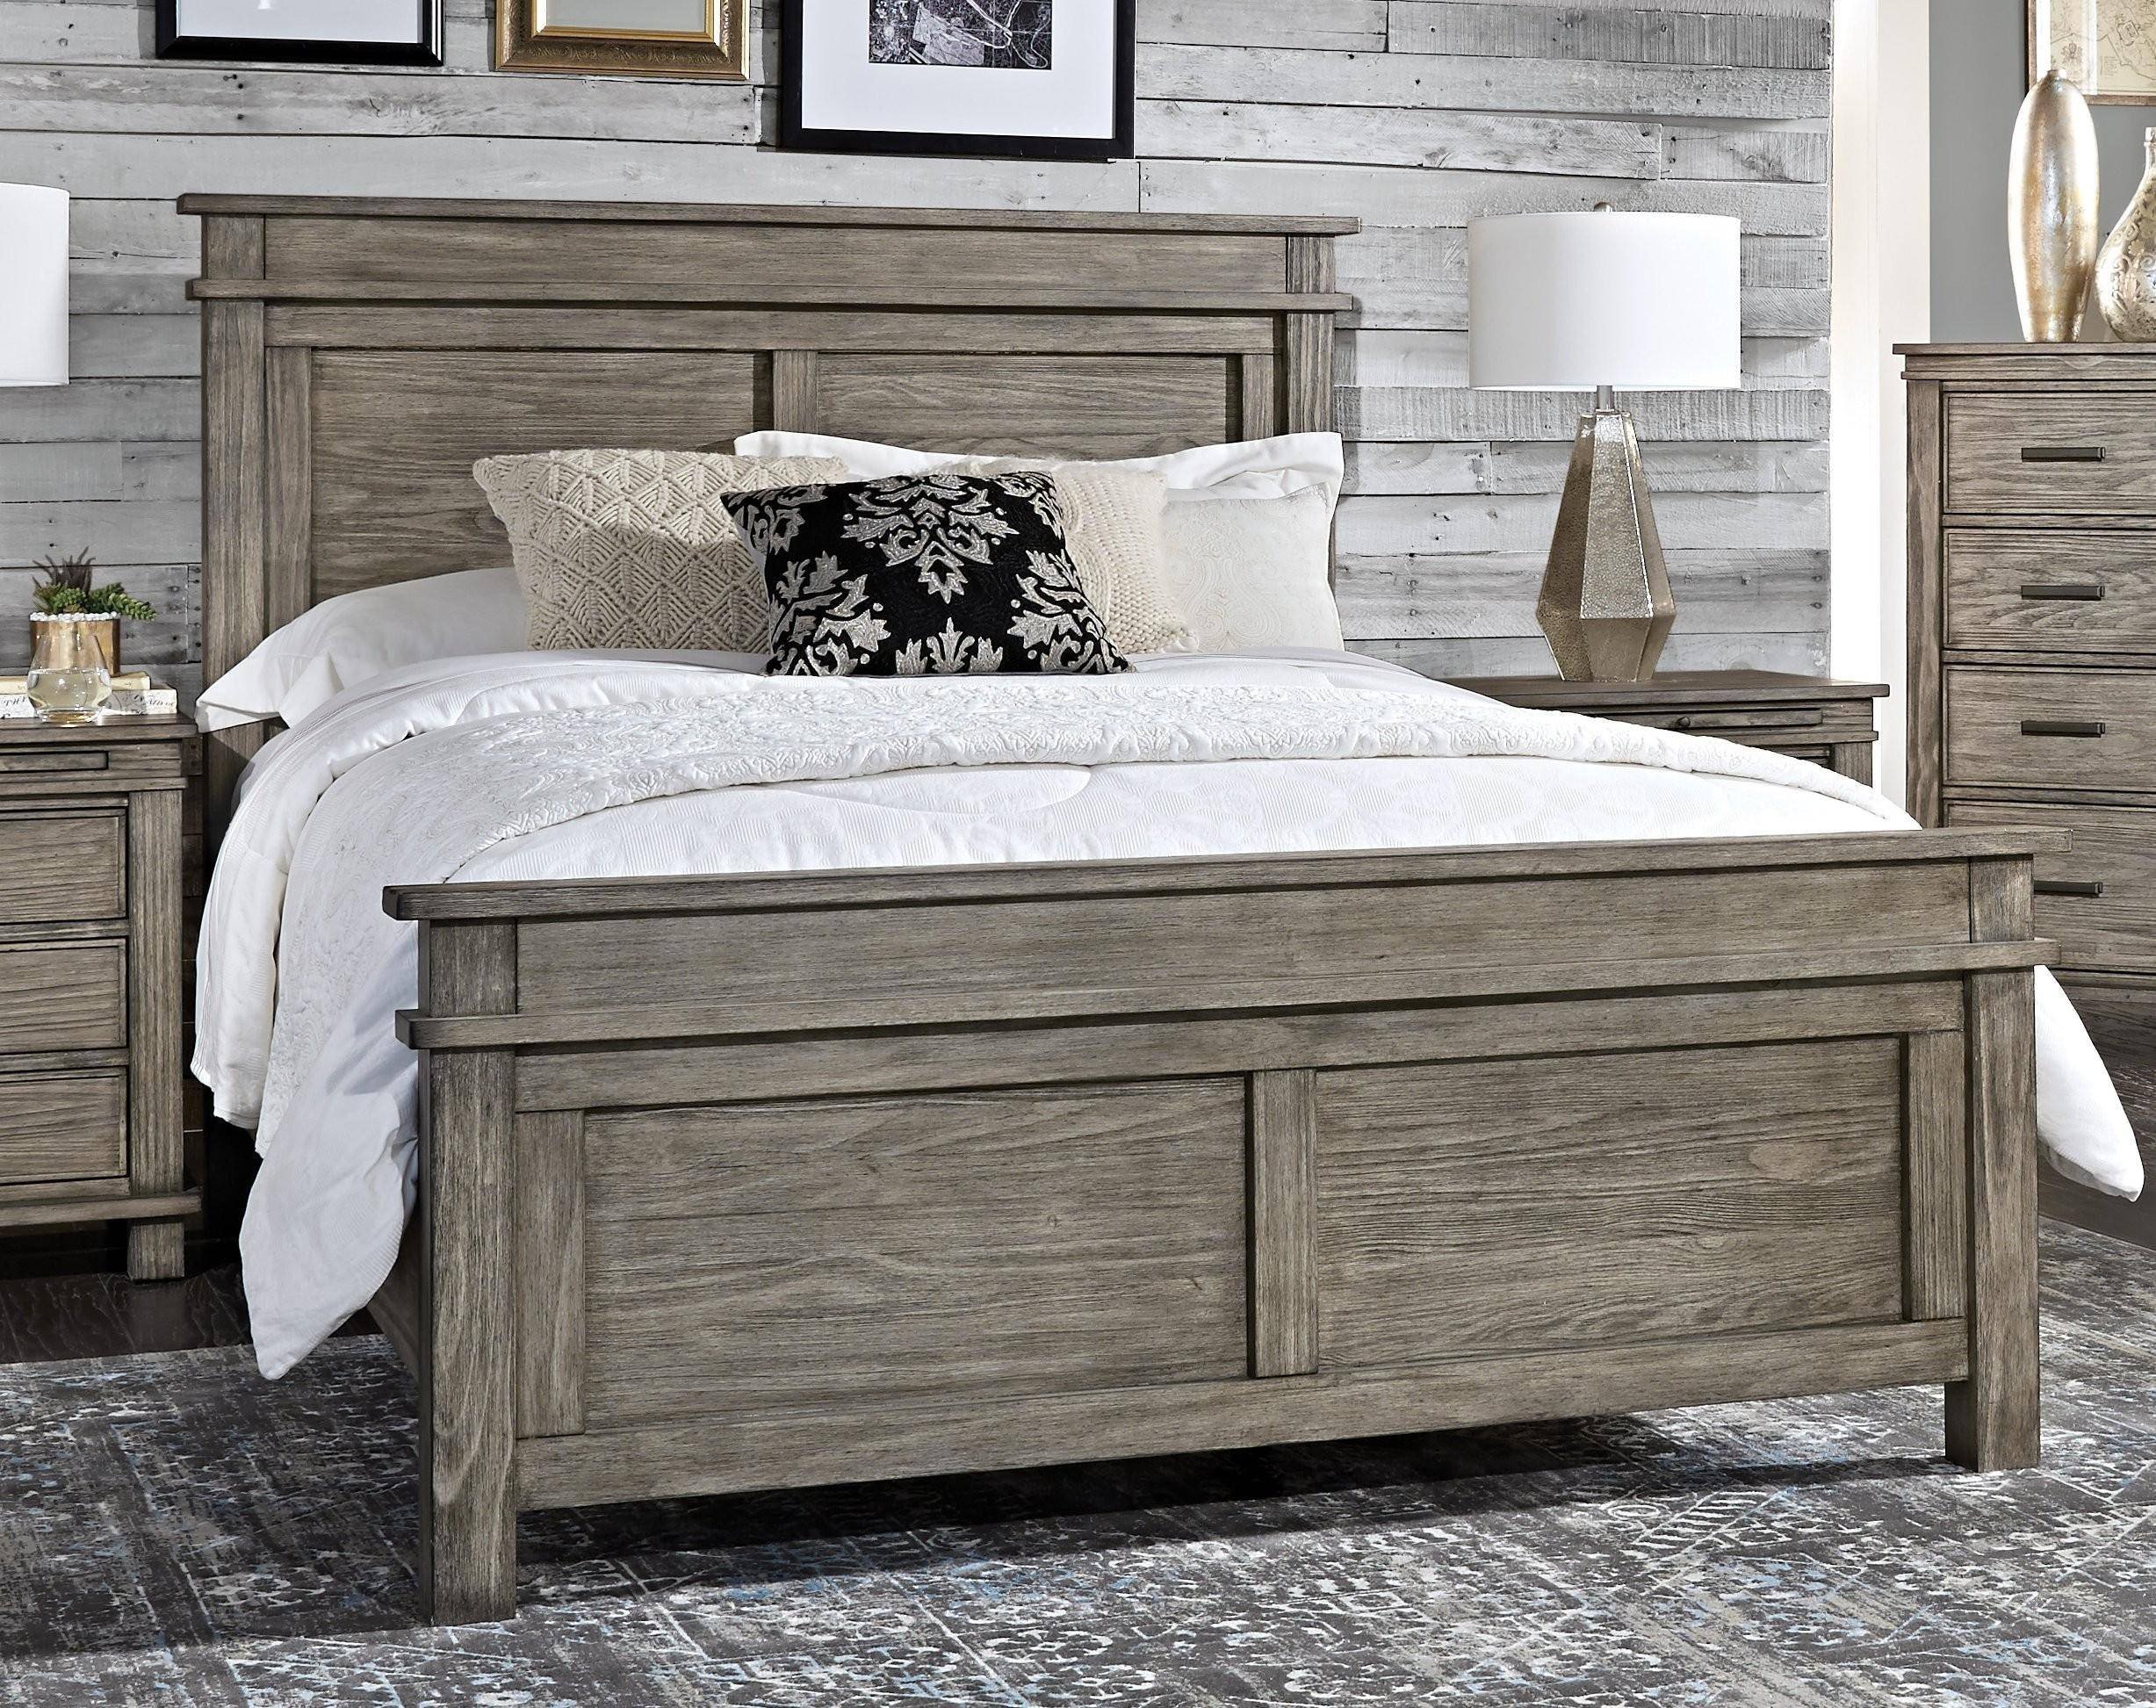 Rustic Pine Bedroom Furniture Lovely Rustic Cal King Panel Bedrom Set 4ps Greystone Glpgr5230 A